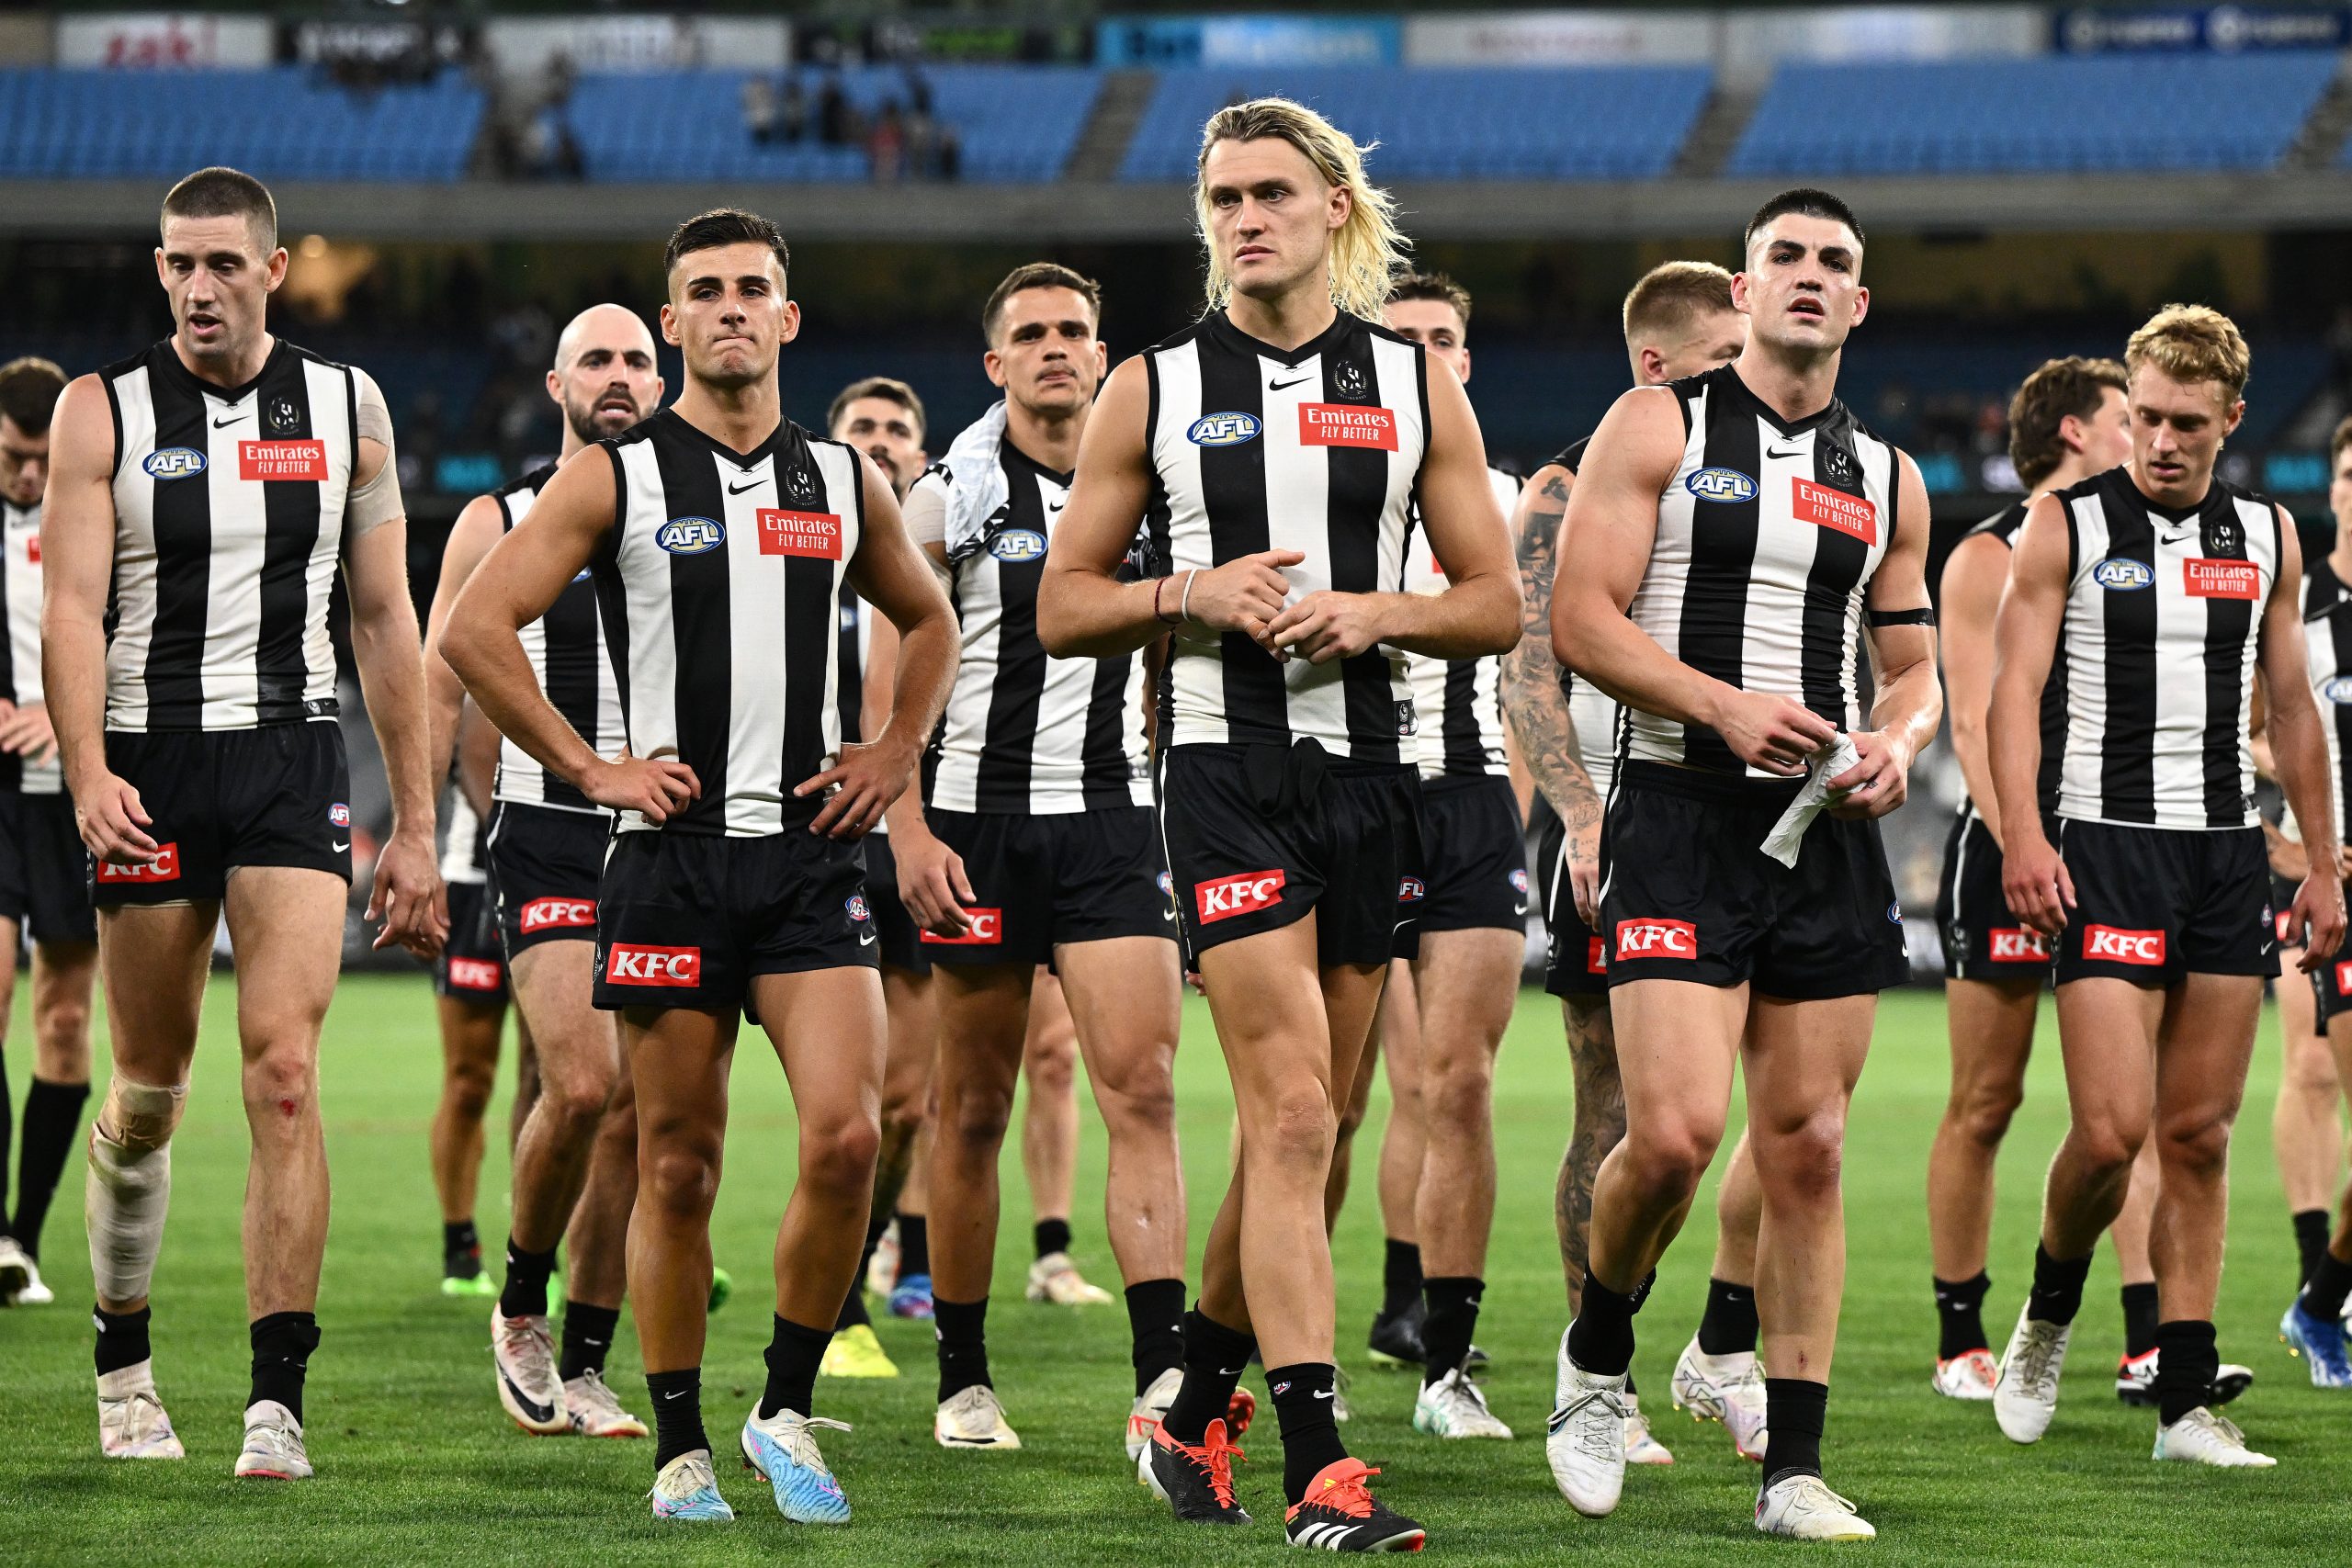 Collingwood has begun their premiership defence with two losses.